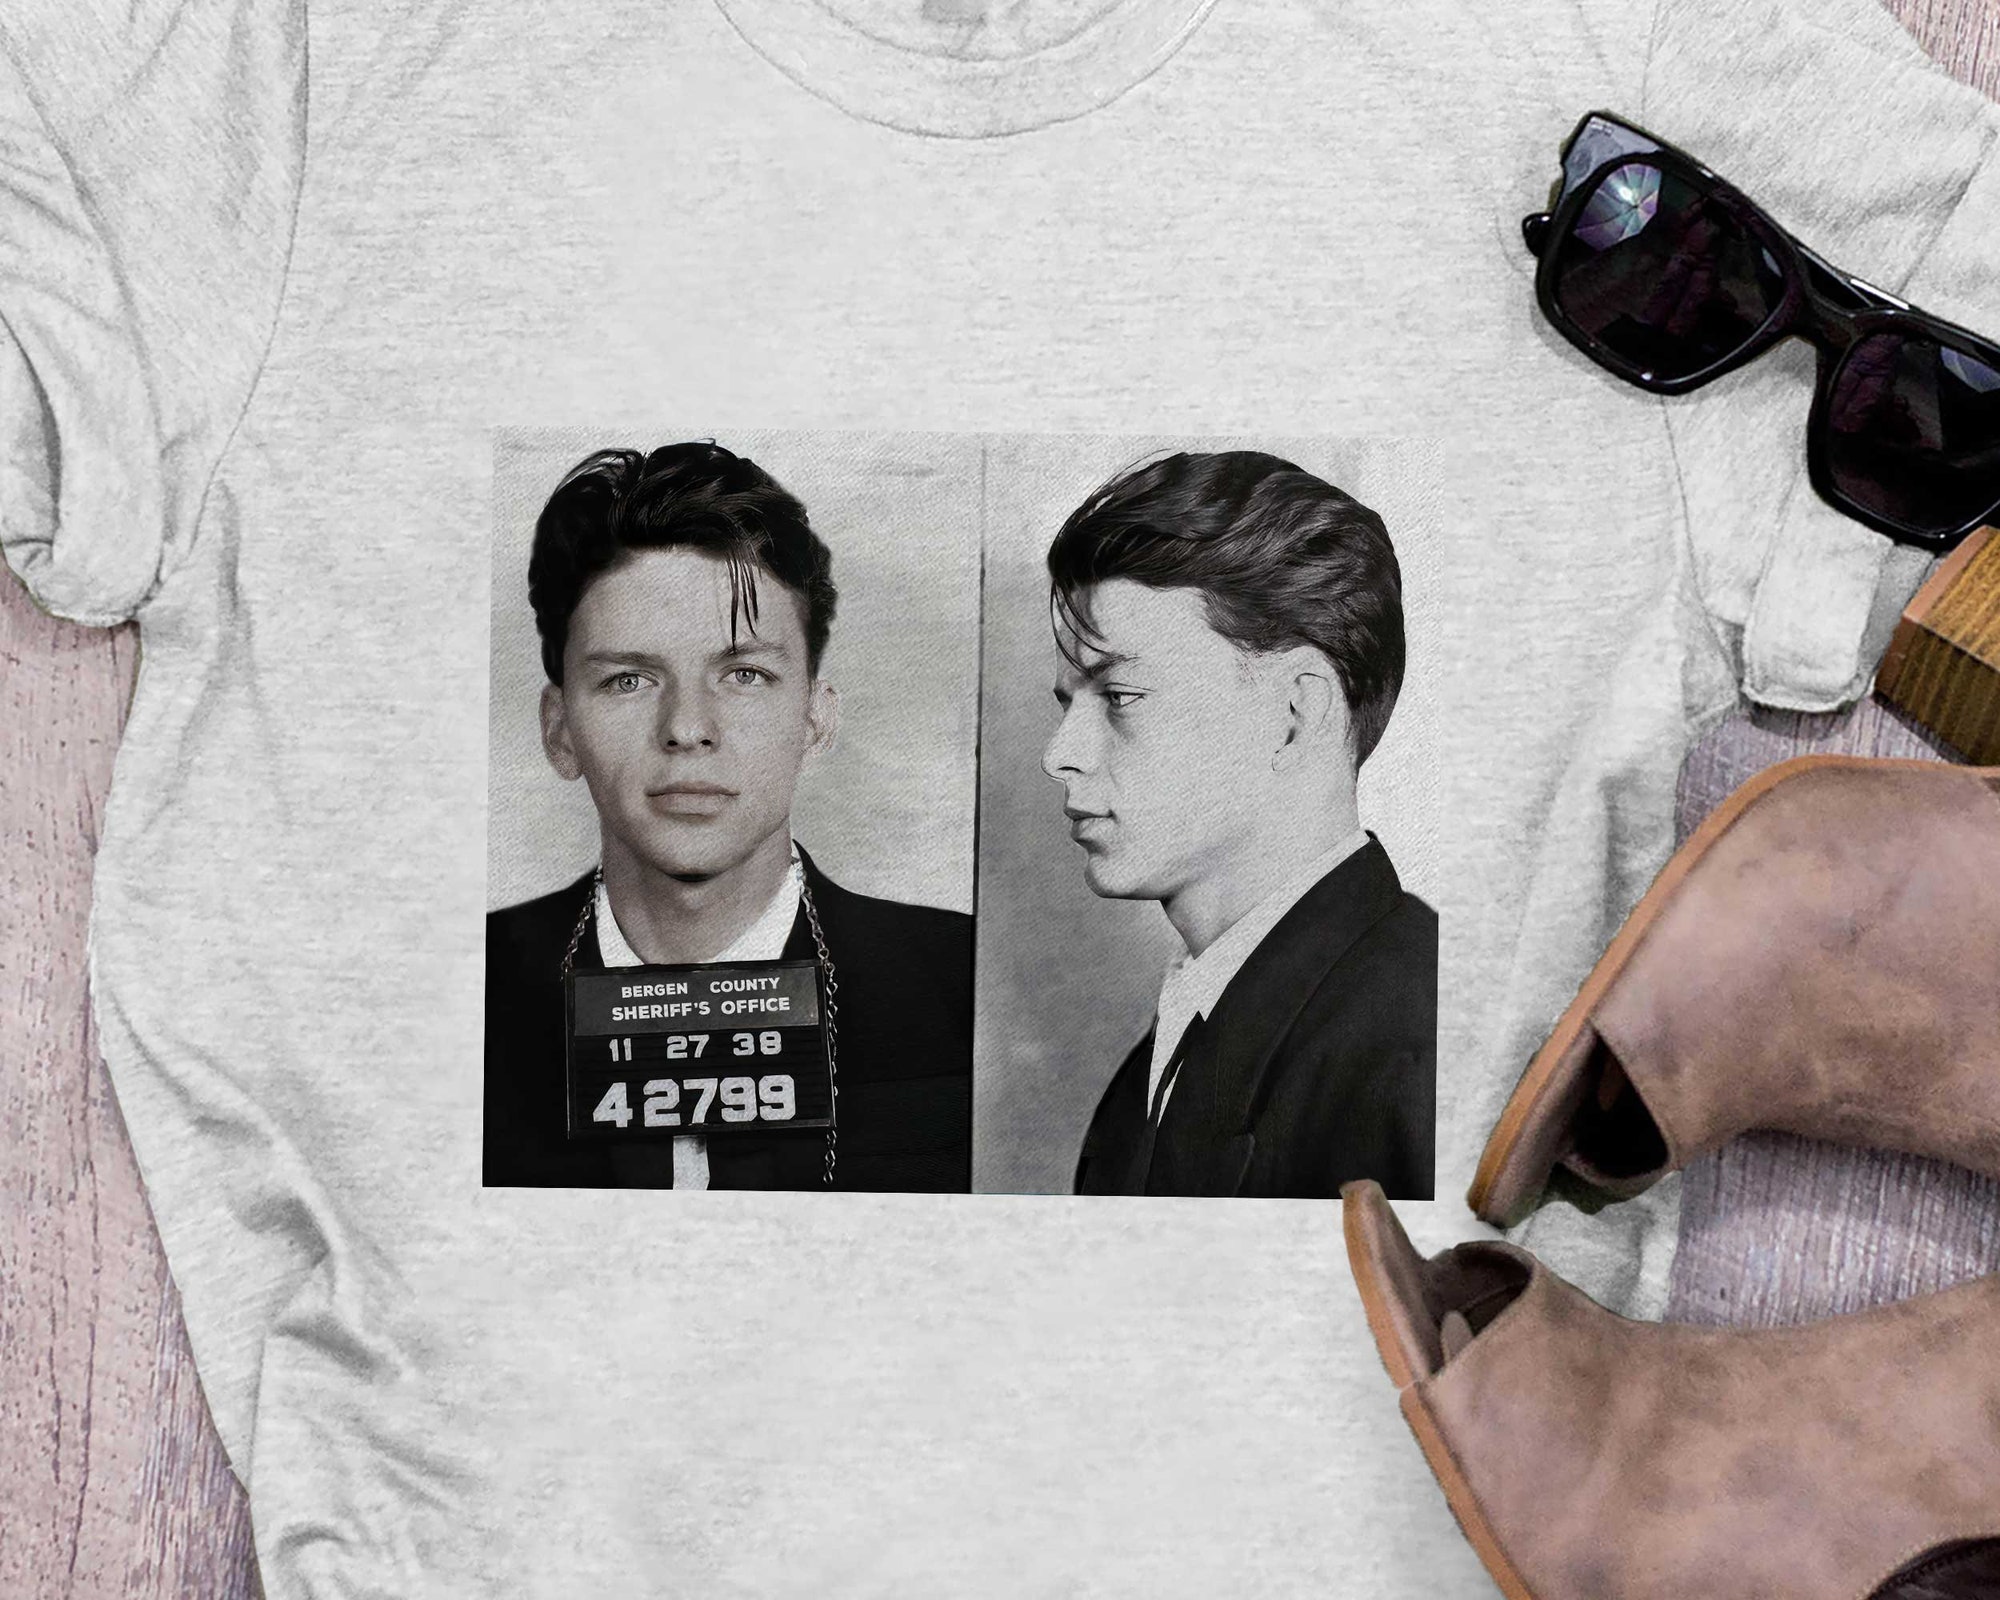 Discover Frank Sinatra Shirt, mugshot shirt, Frank Sinatra fan, Come Fly with Me